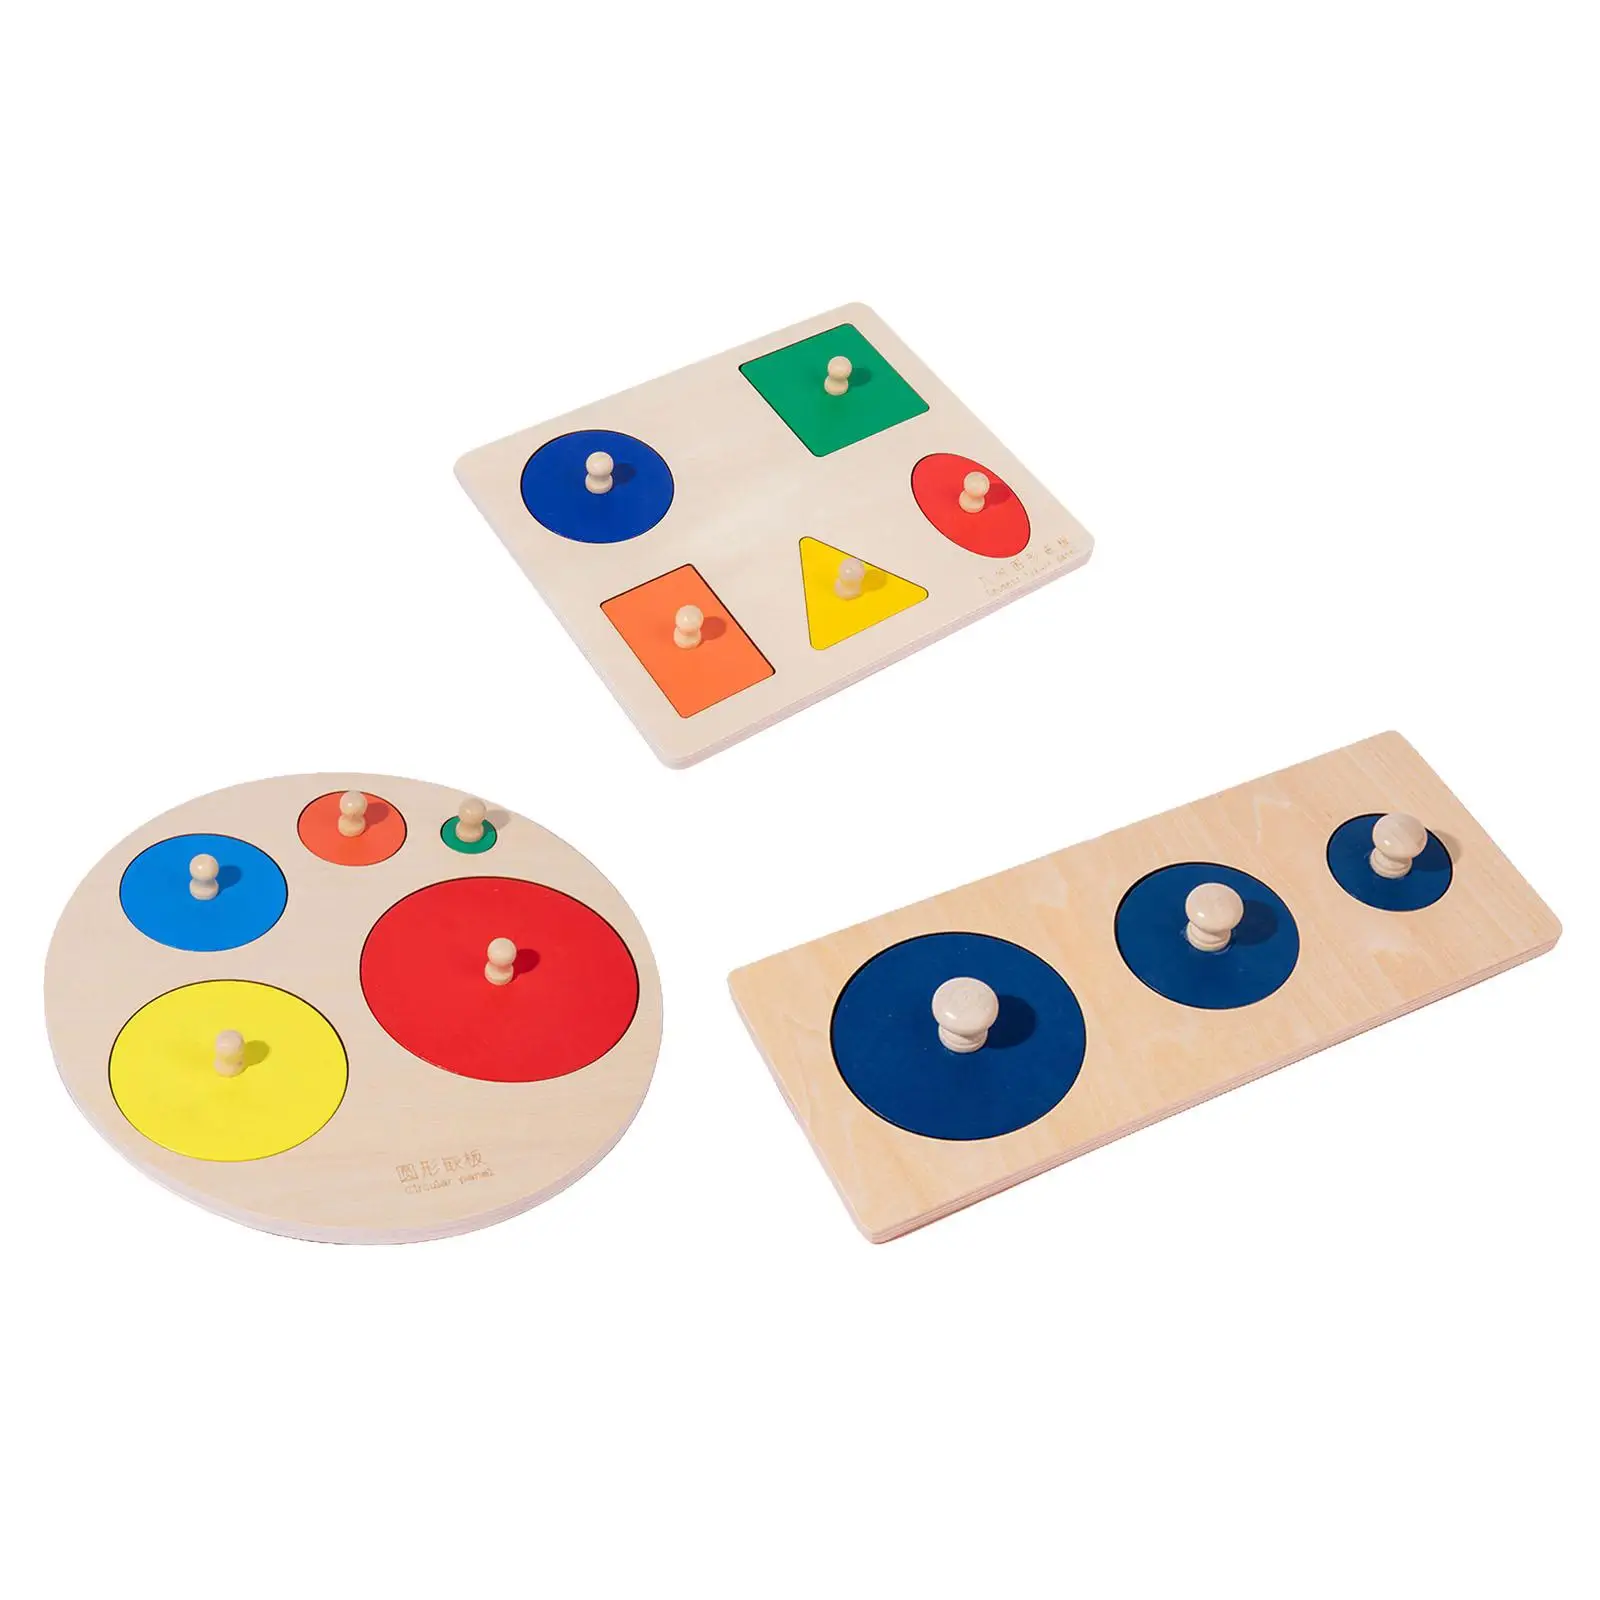 Grasp Board Learning Puzzle Preschool Learning Educational Material Sensorial Toy Wood Shape Puzzles for Game Activities Indoor